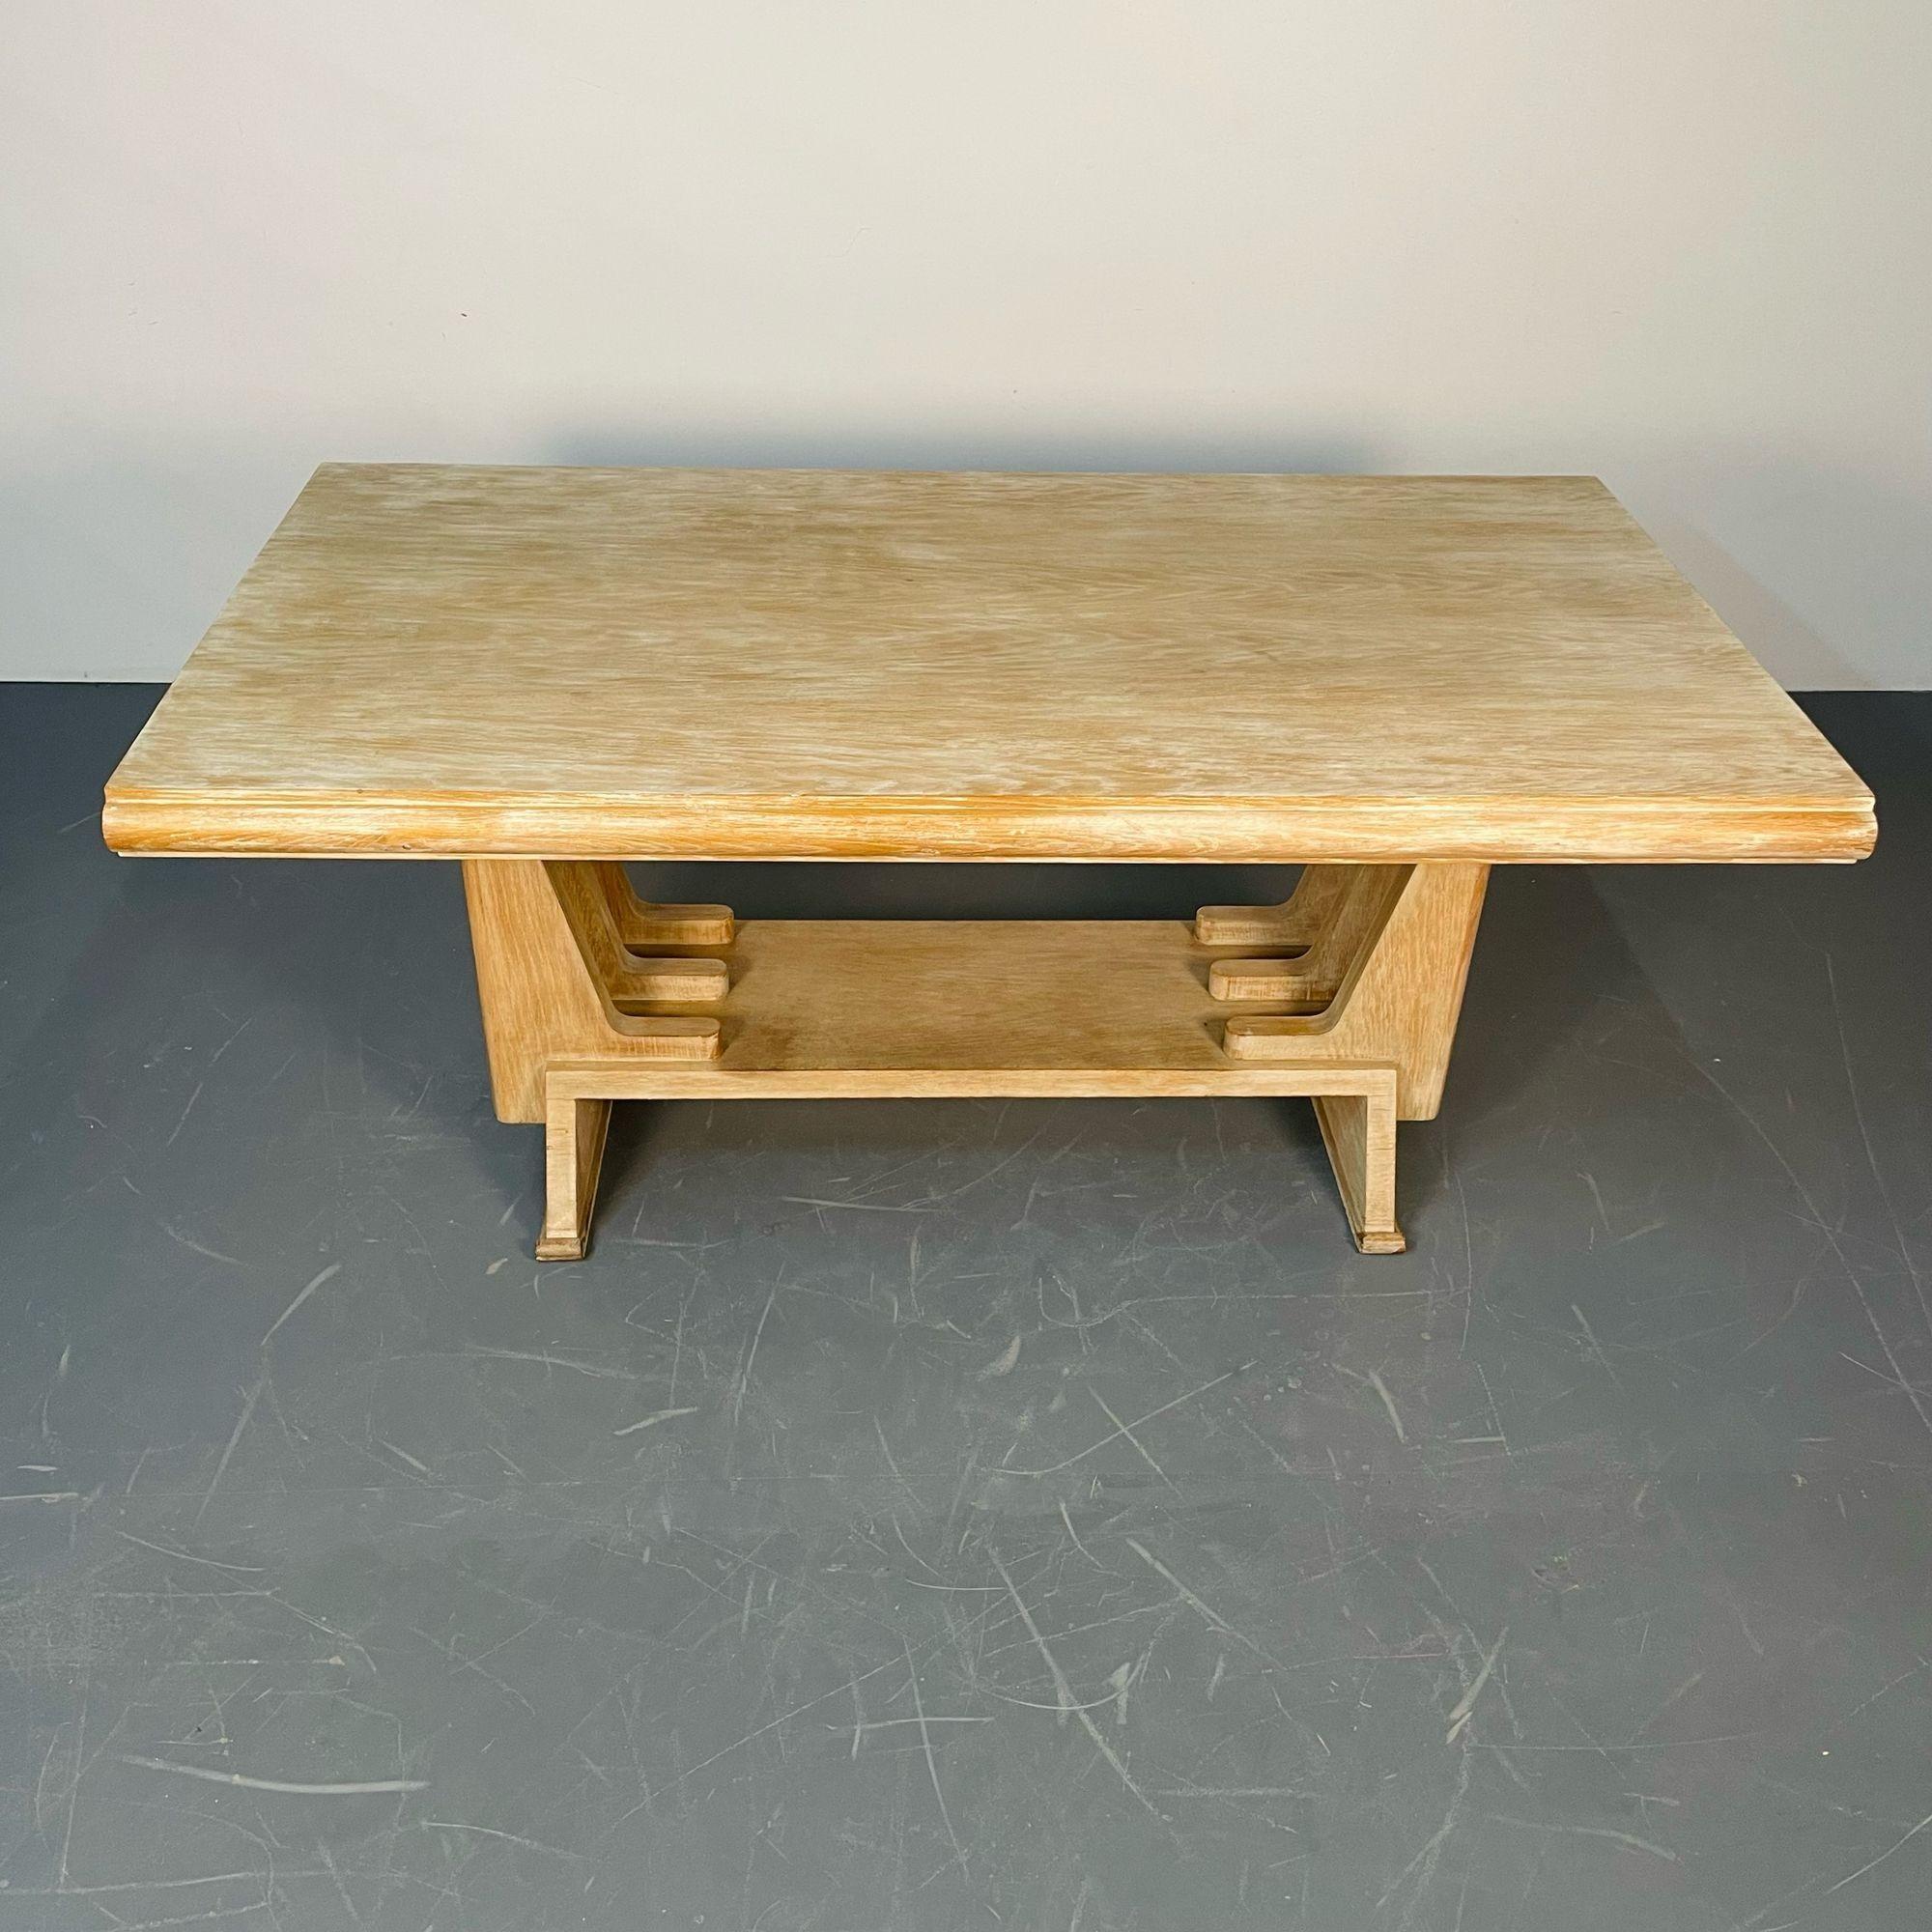 French Mid-Century Modern Style Dining / Kitchen Table, Farmhouse, Trestle Base
 
A finely constructed trestle or farm table in a recently refinished design. Strong and Sturdy. 

29.25 by 68.5 by 37.25 Wide
 
Ceruse Oak Finish